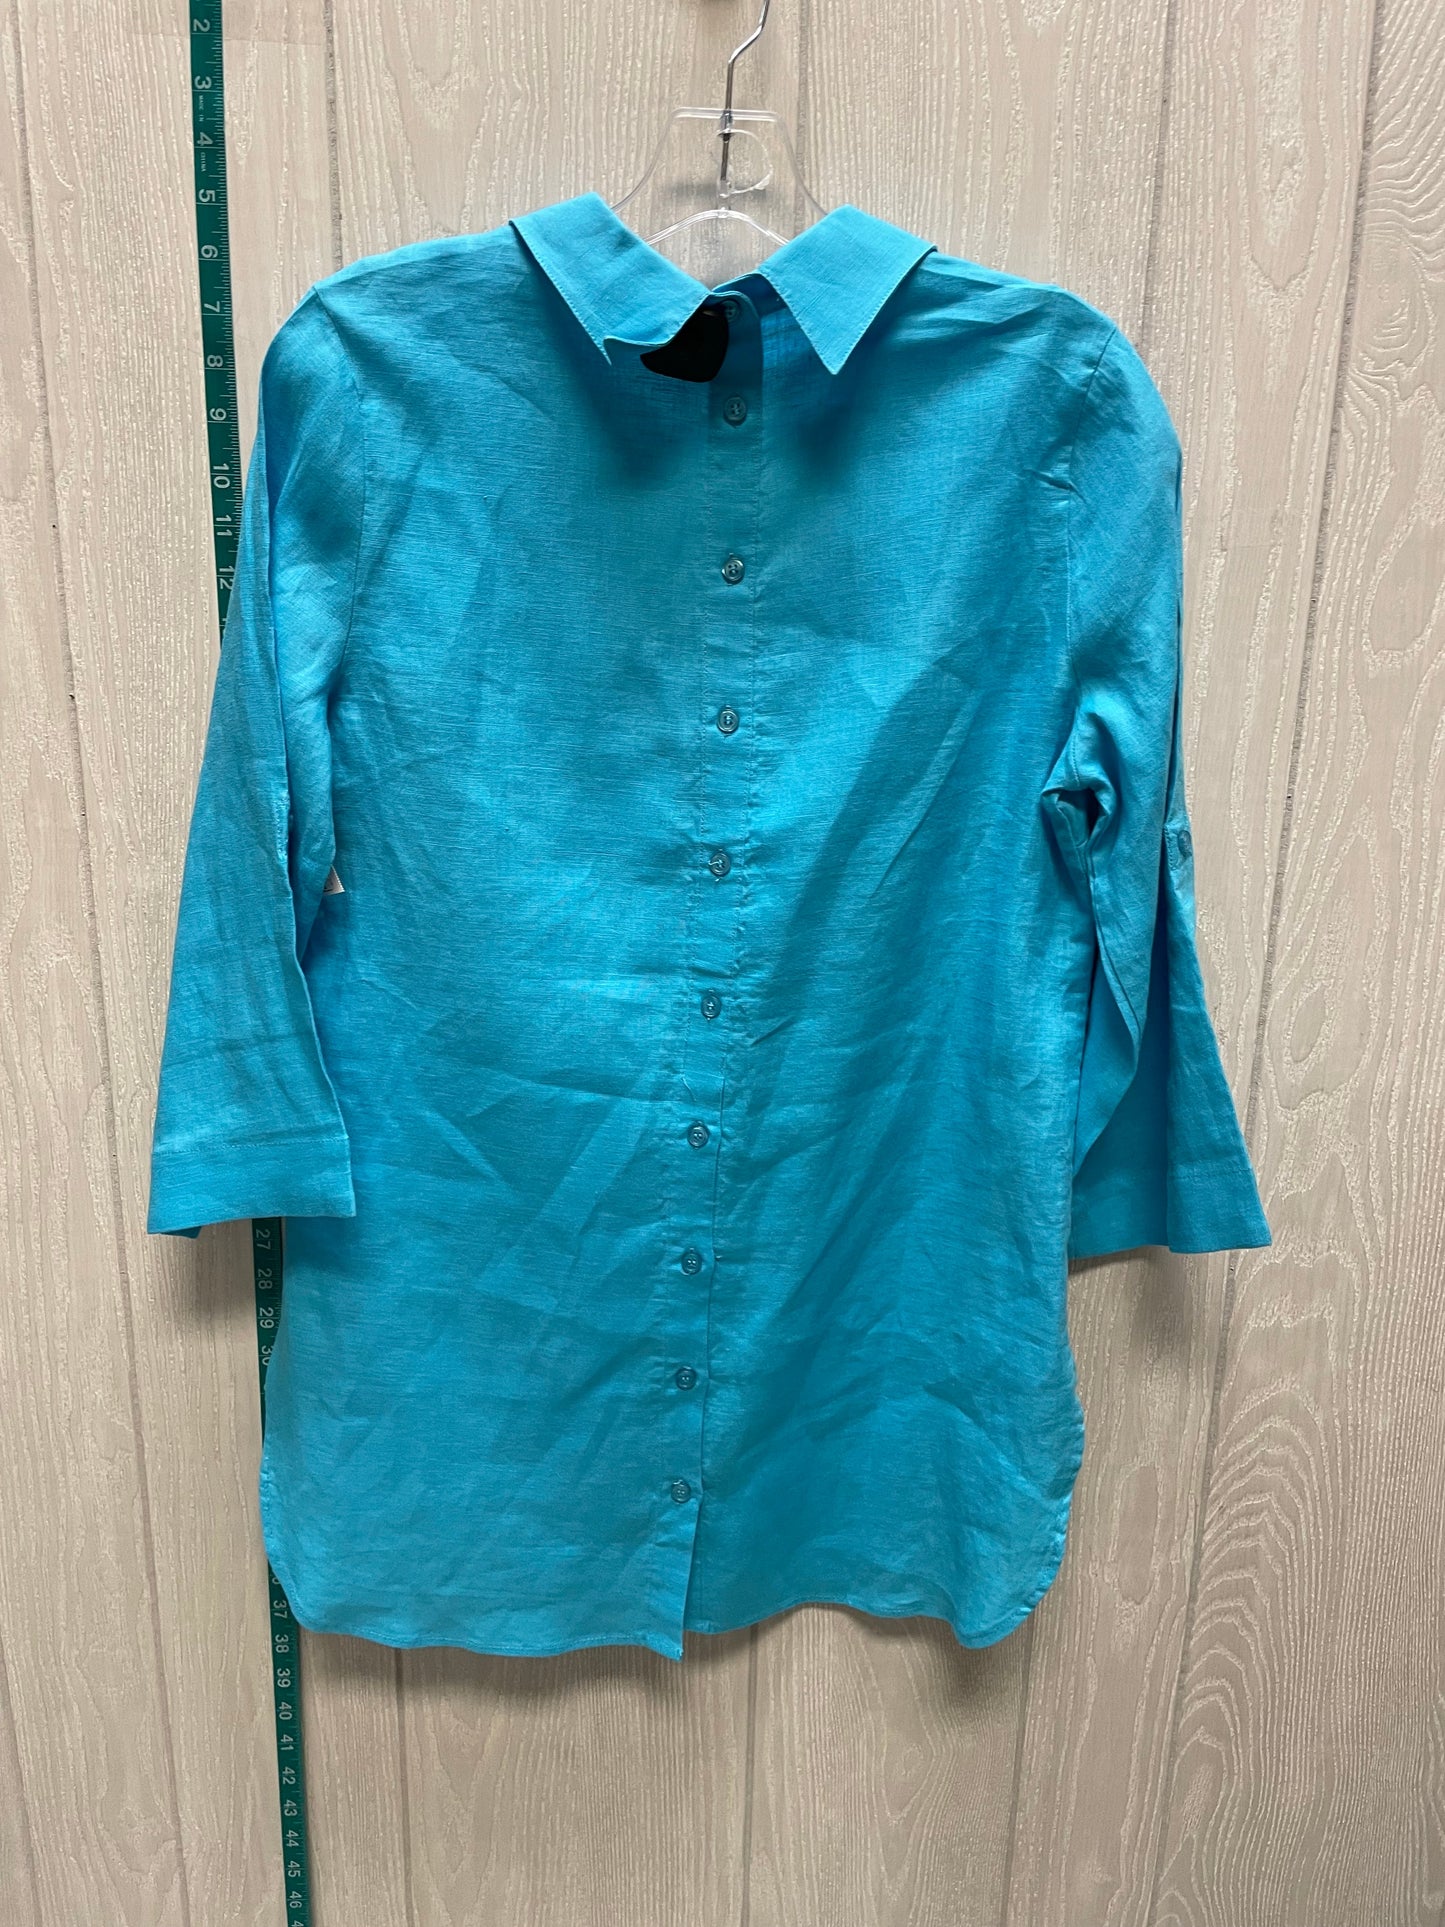 Tunic Long Sleeve By Soft Surroundings  Size: S